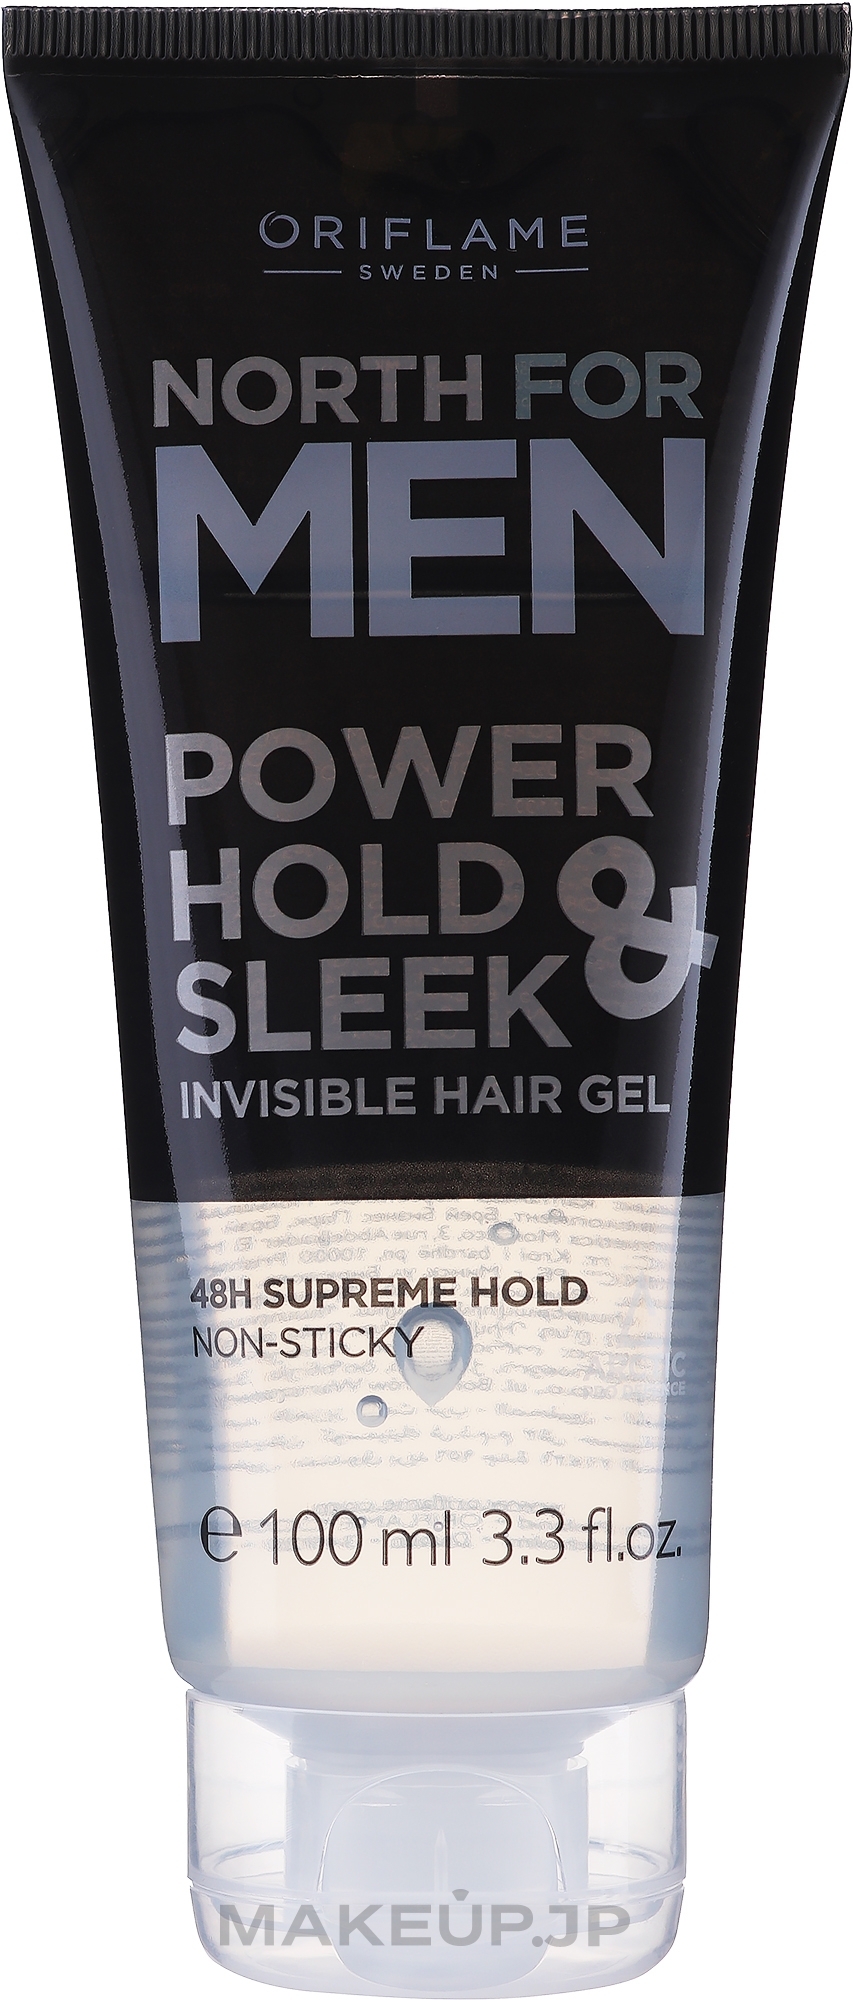 Hair Styling Gel - Oriflame North For Men Power Hold & Sleek Invisible Hair Gel — photo 100 ml